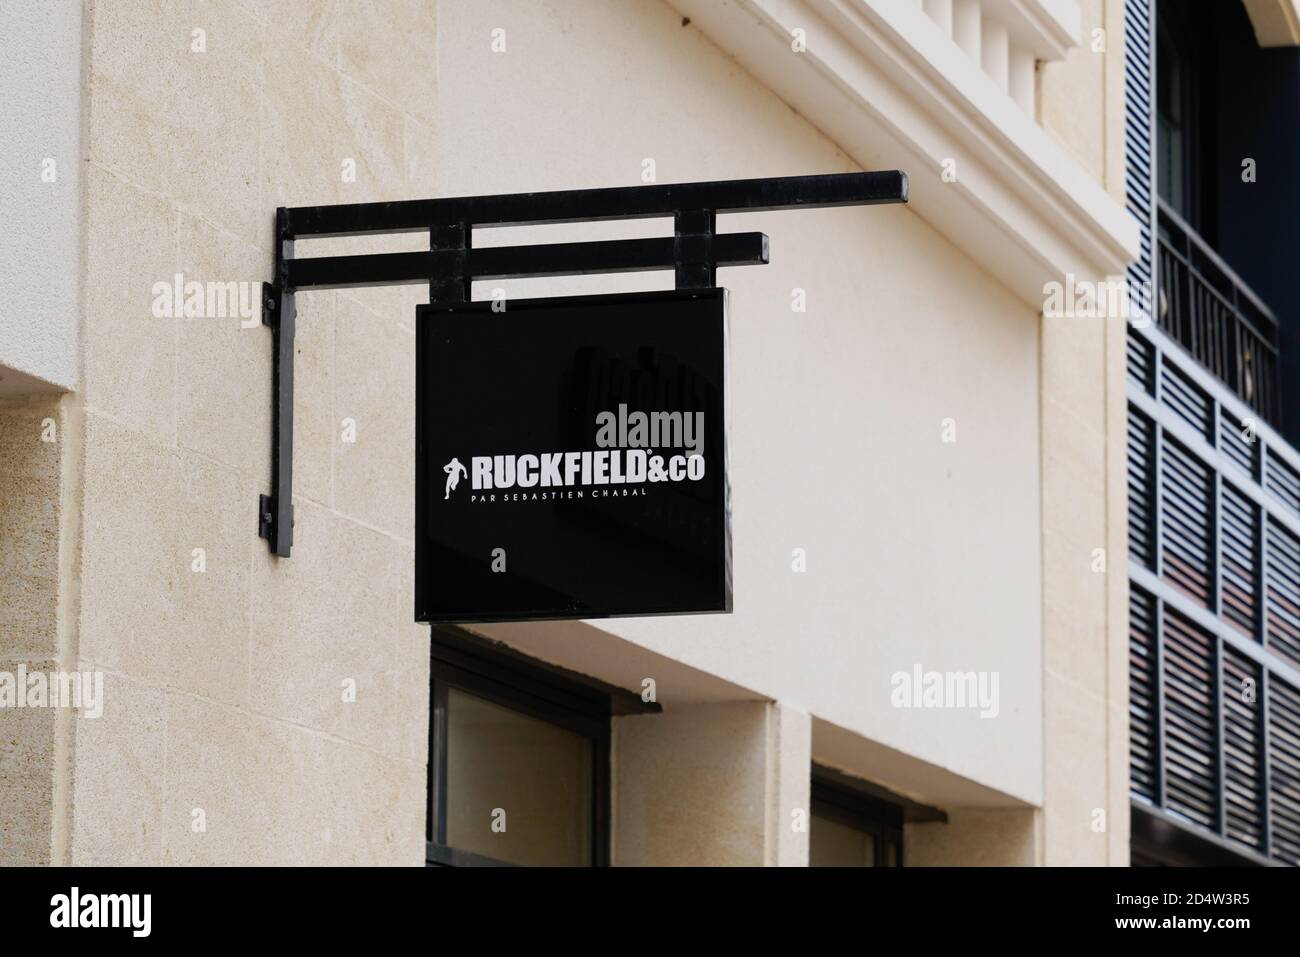 Bordeaux , Aquitaine / France - 10 01 2020 : ruckfield & co logo text and sign front of fashion sporty store by sebastien Chabal of rugby sport shop c Stock Photo